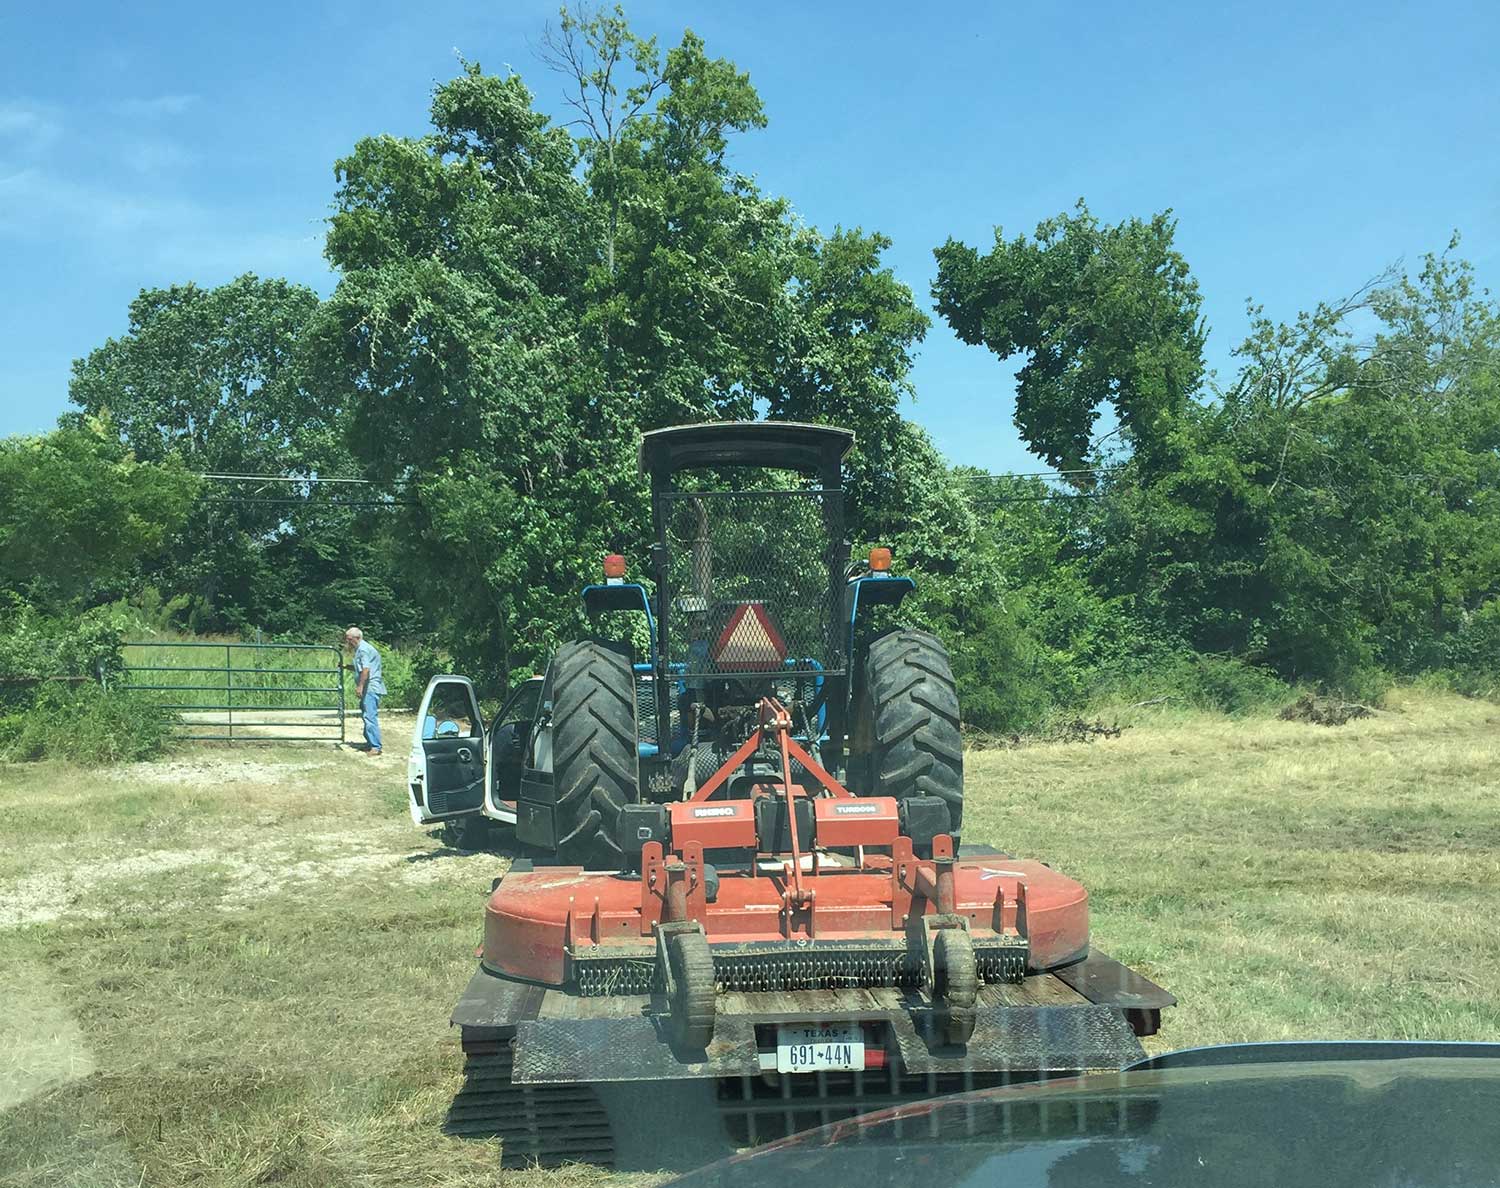 A tractor mower is an expensive piece of machinery